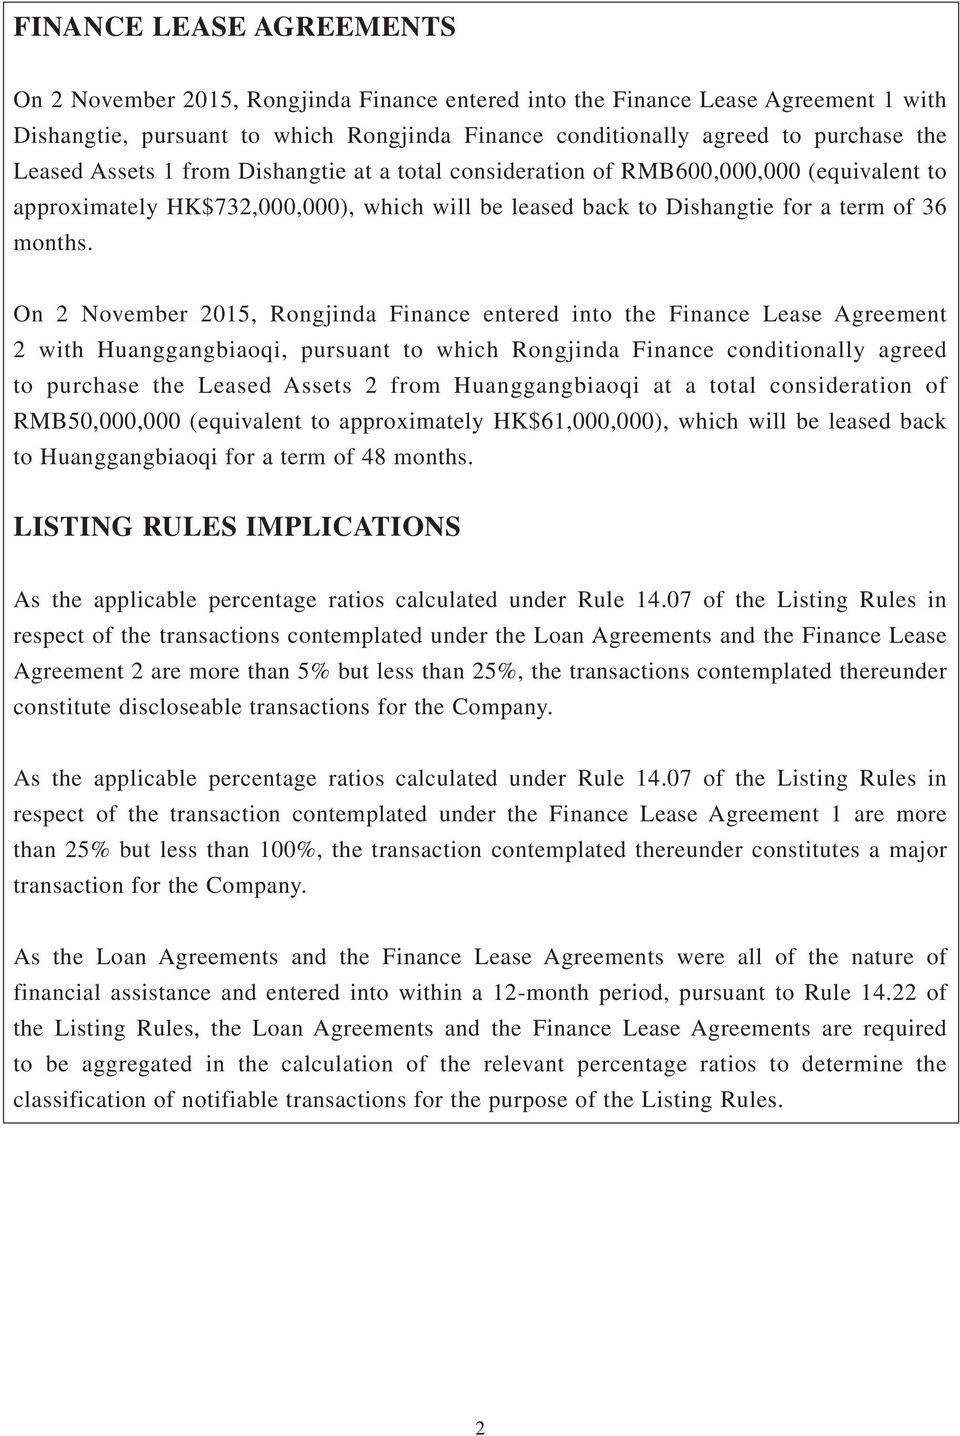 On 2 November 2015, Rongjinda Finance entered into the Finance Lease Agreement 2 with Huanggangbiaoqi, pursuant to which Rongjinda Finance conditionally agreed to purchase the Leased Assets 2 from